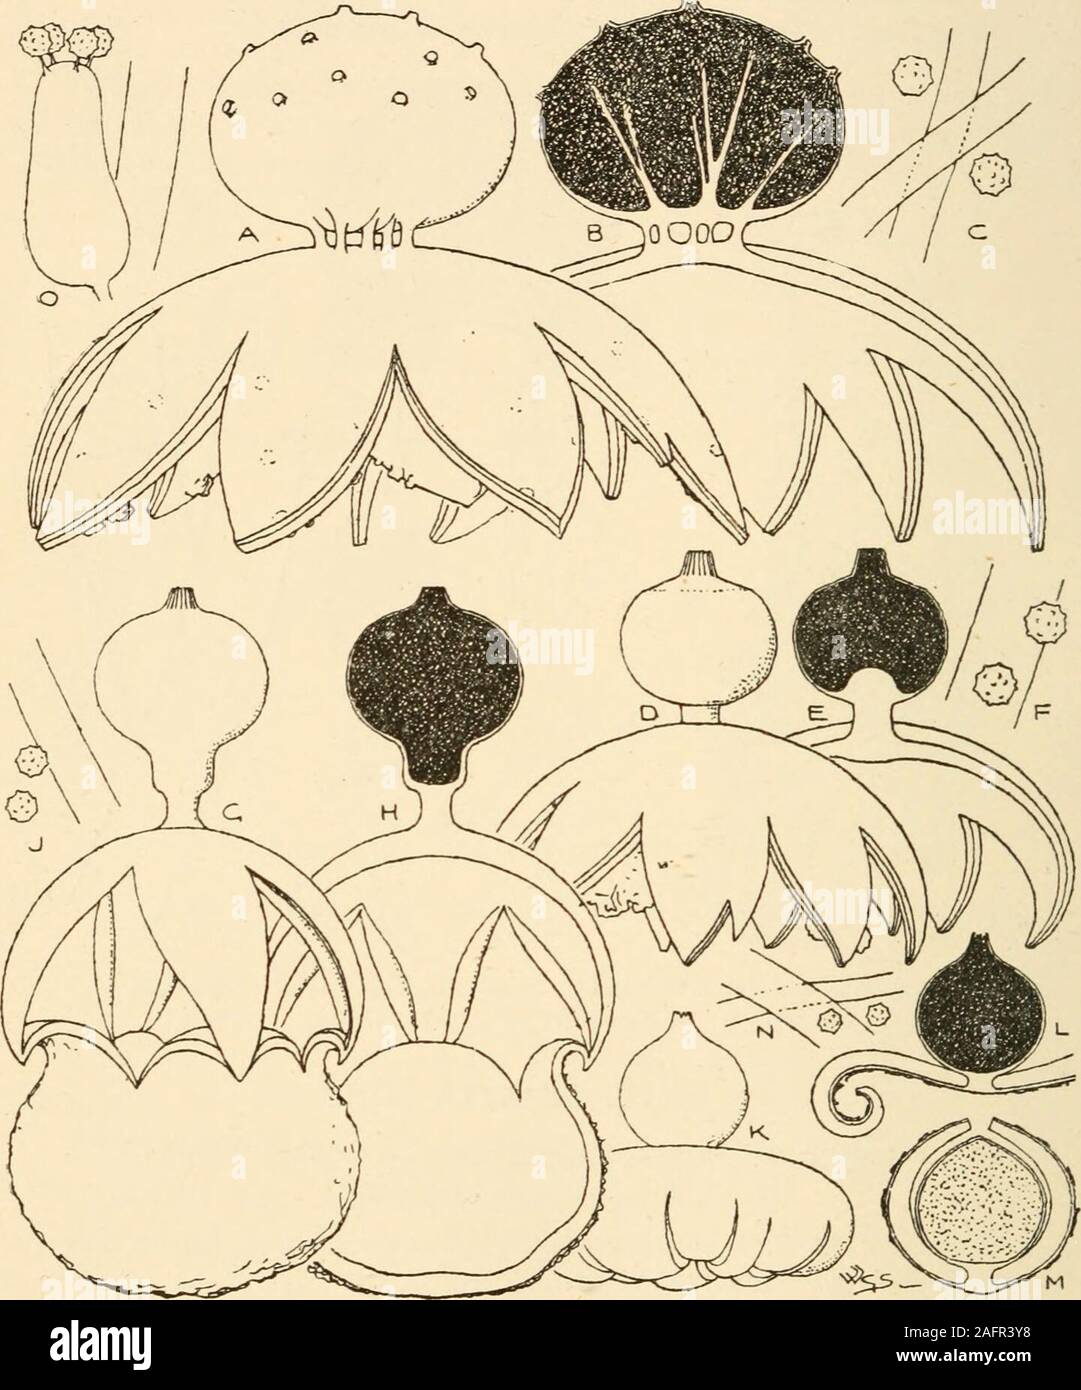 . Synopsis of the British Basidiomycetes ; a descriptive catalogue of the drawings and specimens in the Department of botany, British museum. Fig. 129.—Queletia niirabilis Fr. One-half natural size. A, entire plant.B, section, c, threads of capillitium and sports. X 750. CXIV. GEASTER Mich. (From the star-like appearance of mature plants;Gr. ge, the earth, aster, a star.) Peridium at first continuous, consisting of three layers, the twooutermost—exoperidium—splitting from the apex in a stellatemanner, the inner layer—endoperidium—sessile or pedicellate, fur-nished at the apex with one orifice, Stock Photo